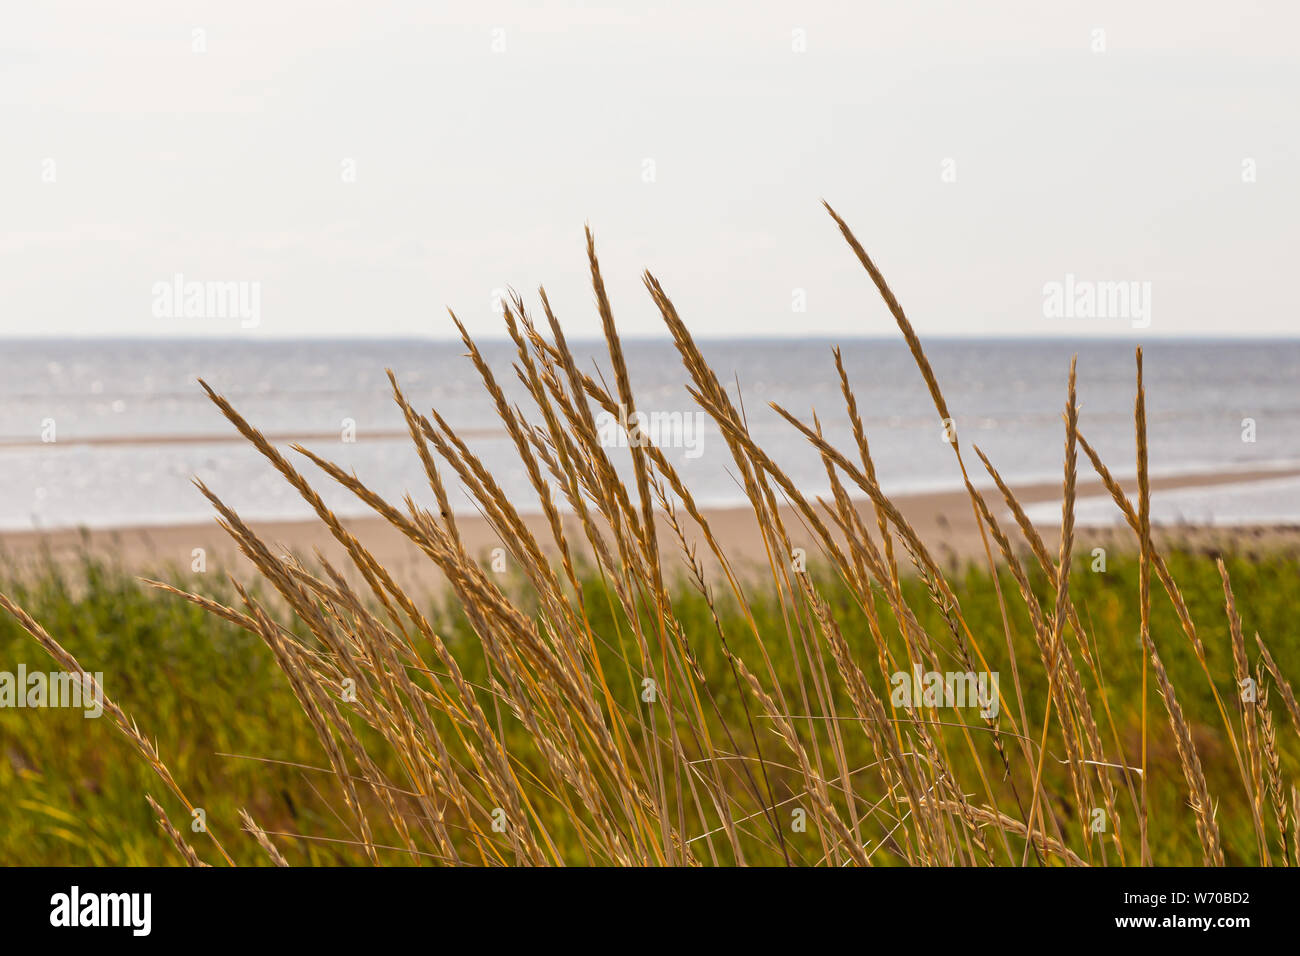 The wheat growing on the seafront meadow, Hailuoto island,  Finland Stock Photo